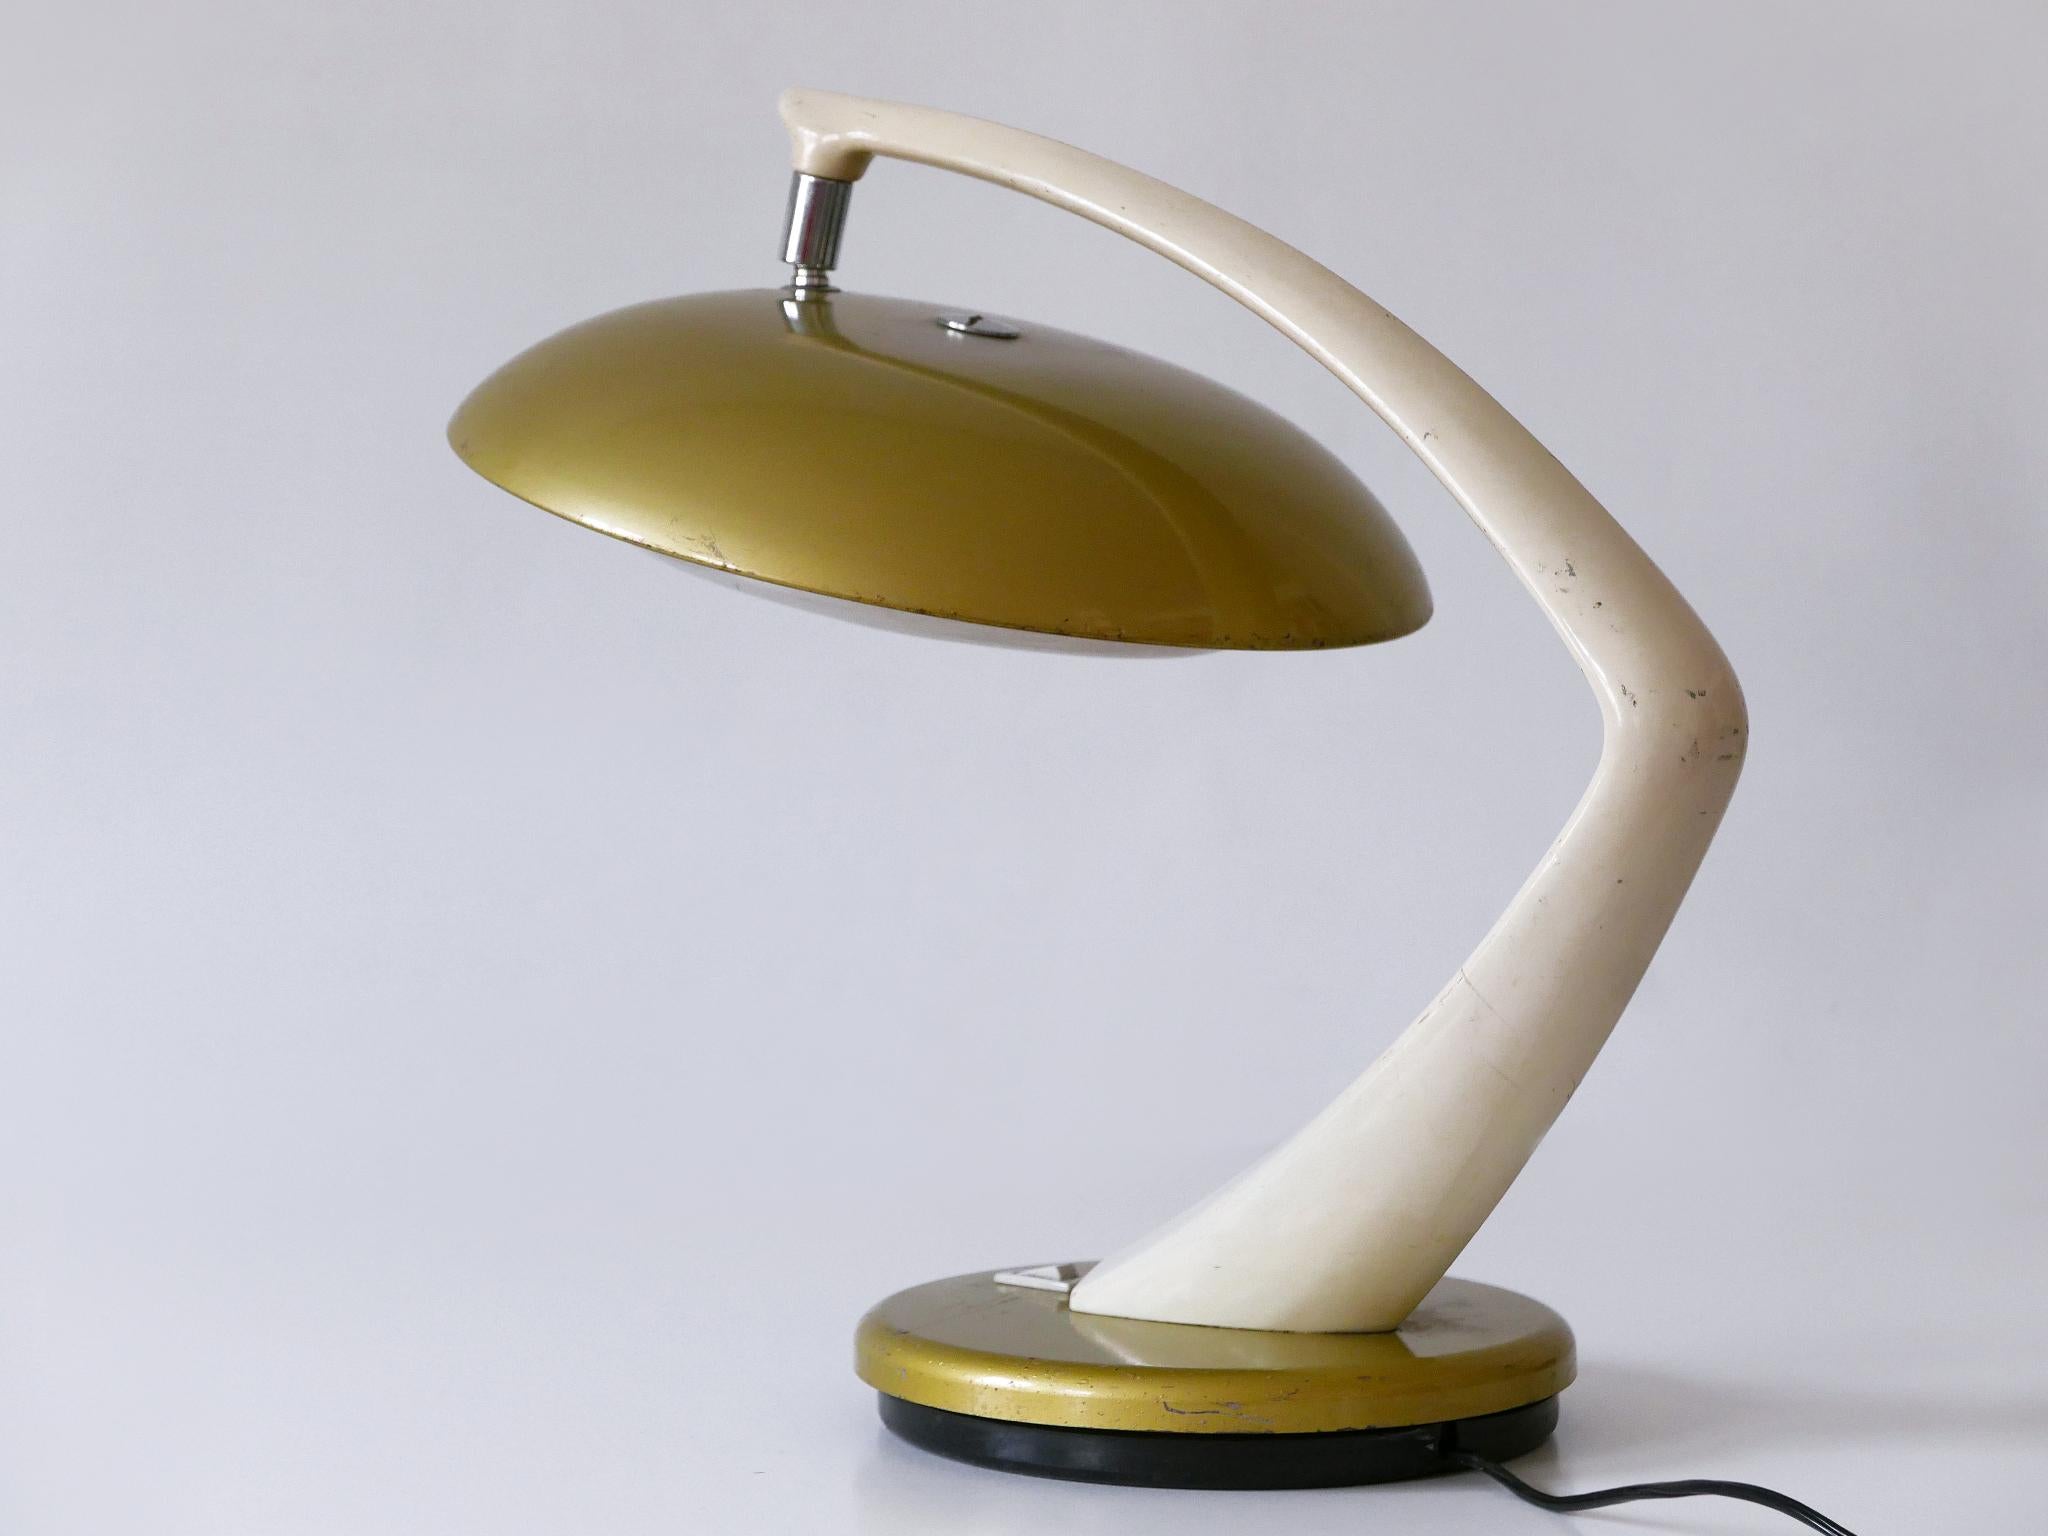 Enameled Mid Century Modern Desk Light or Table Lamp 'Boomerang 64' by Fase Spain 1960s For Sale